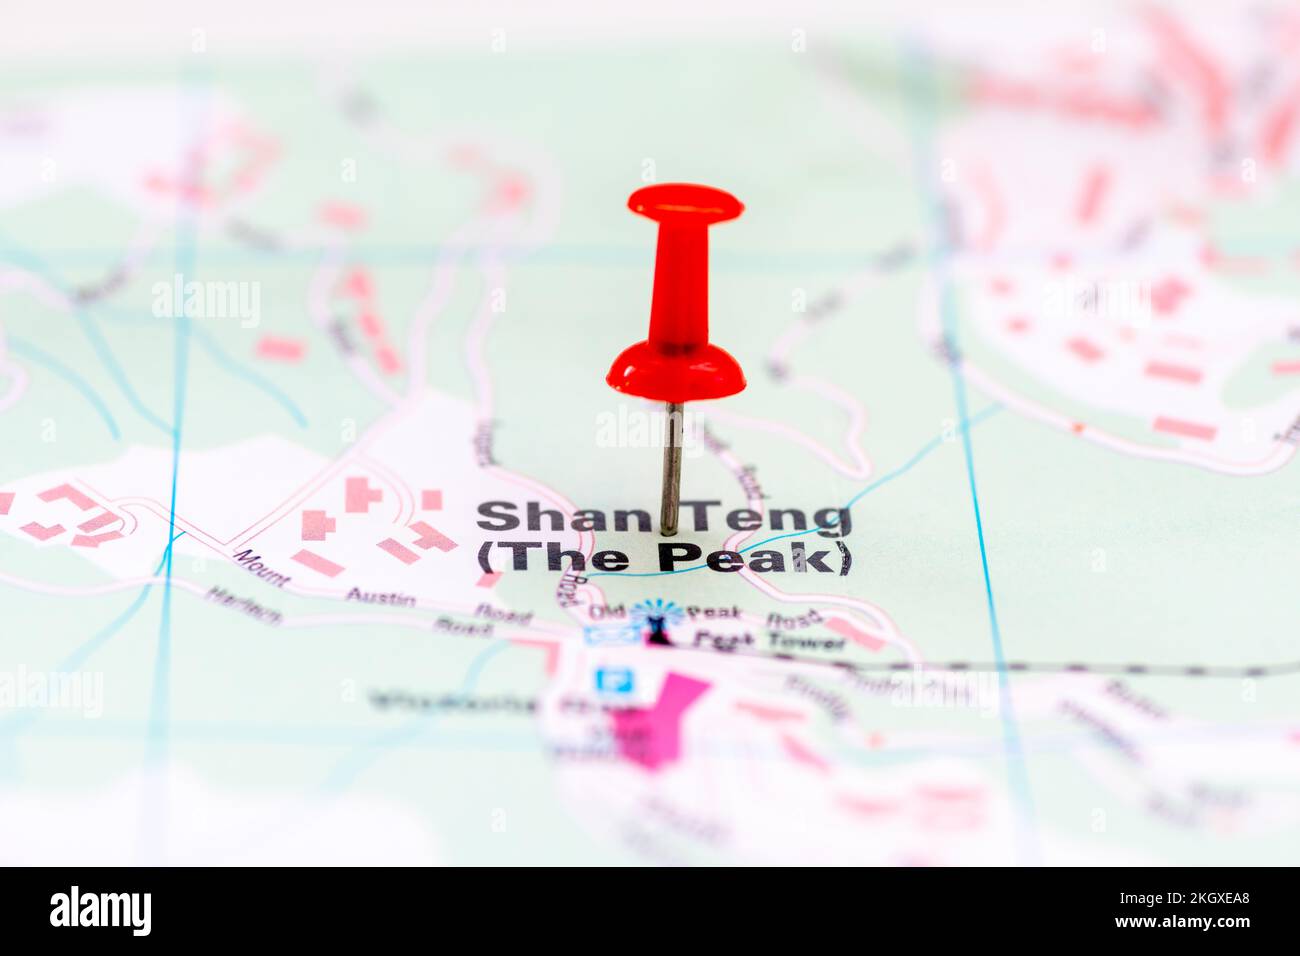 The map location for The Peak on Hong Kong island, China, marked with a red pushpin. Stock Photo